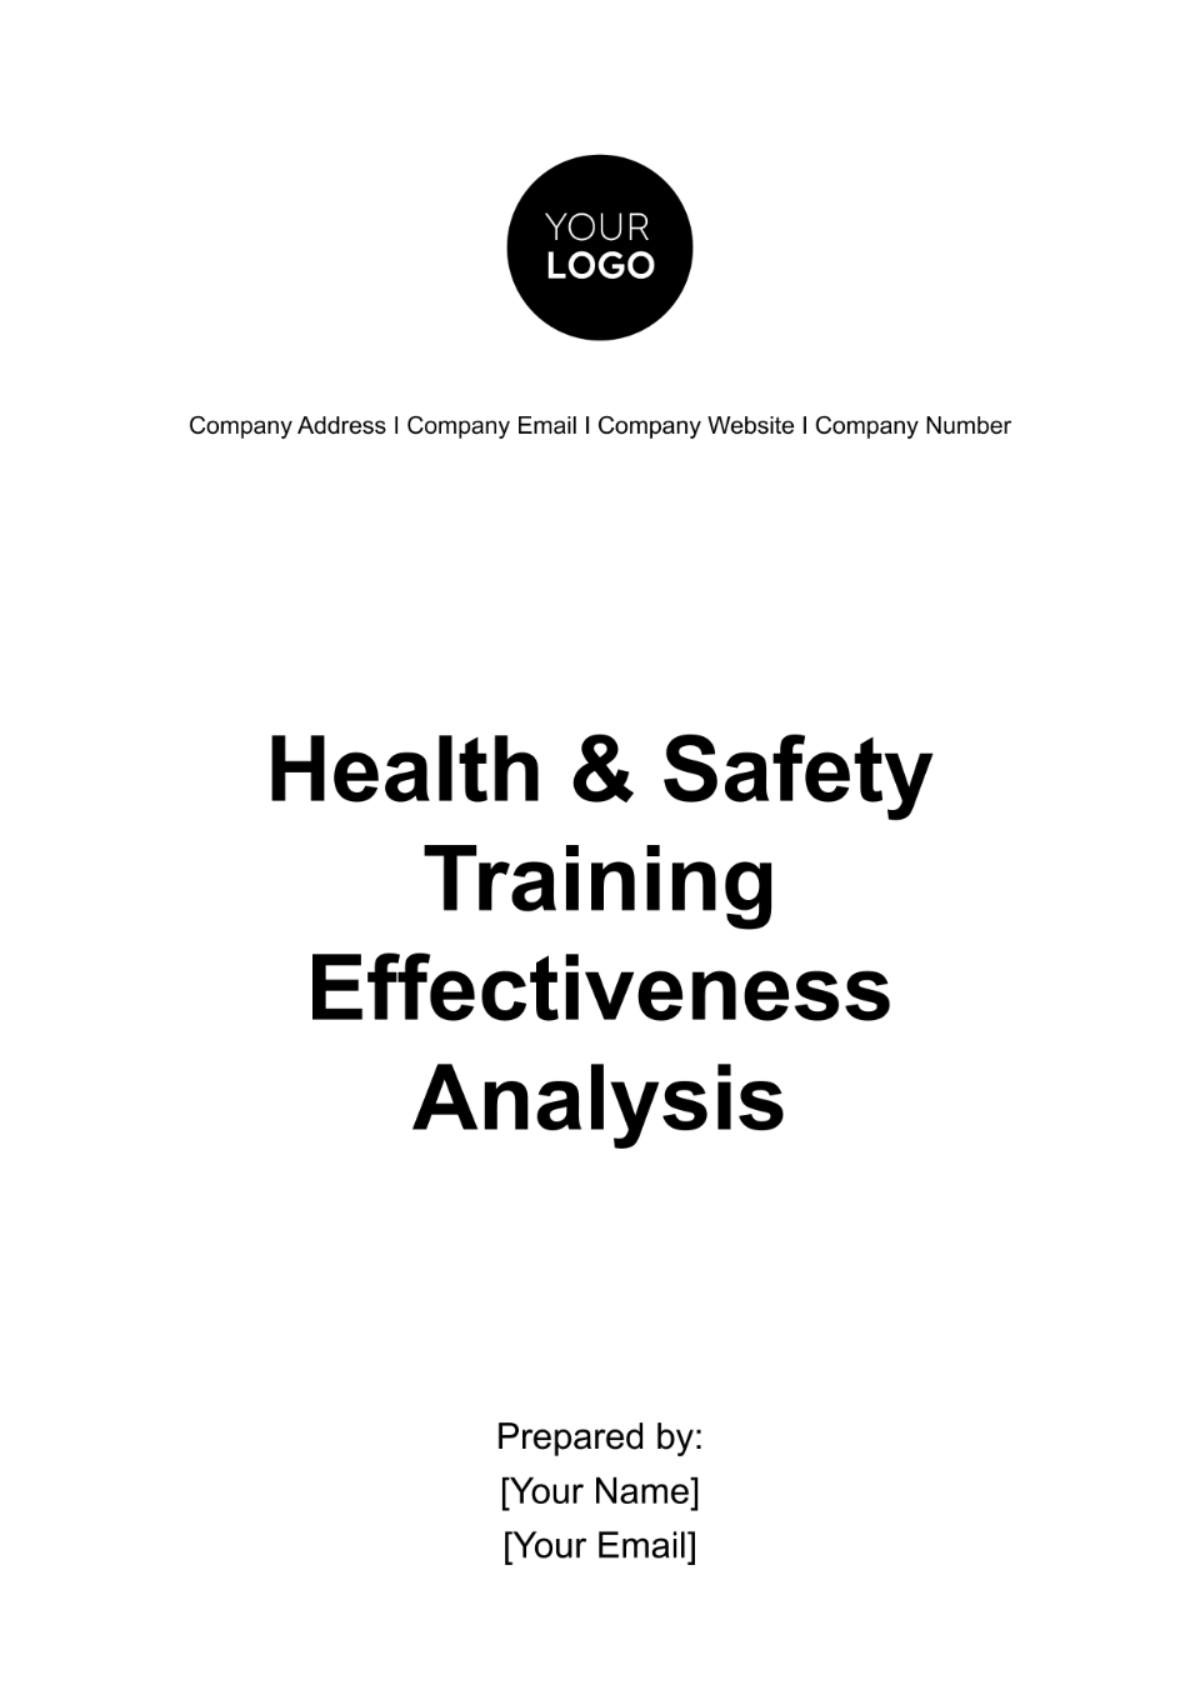 Health & Safety Training Effectiveness Analysis Template